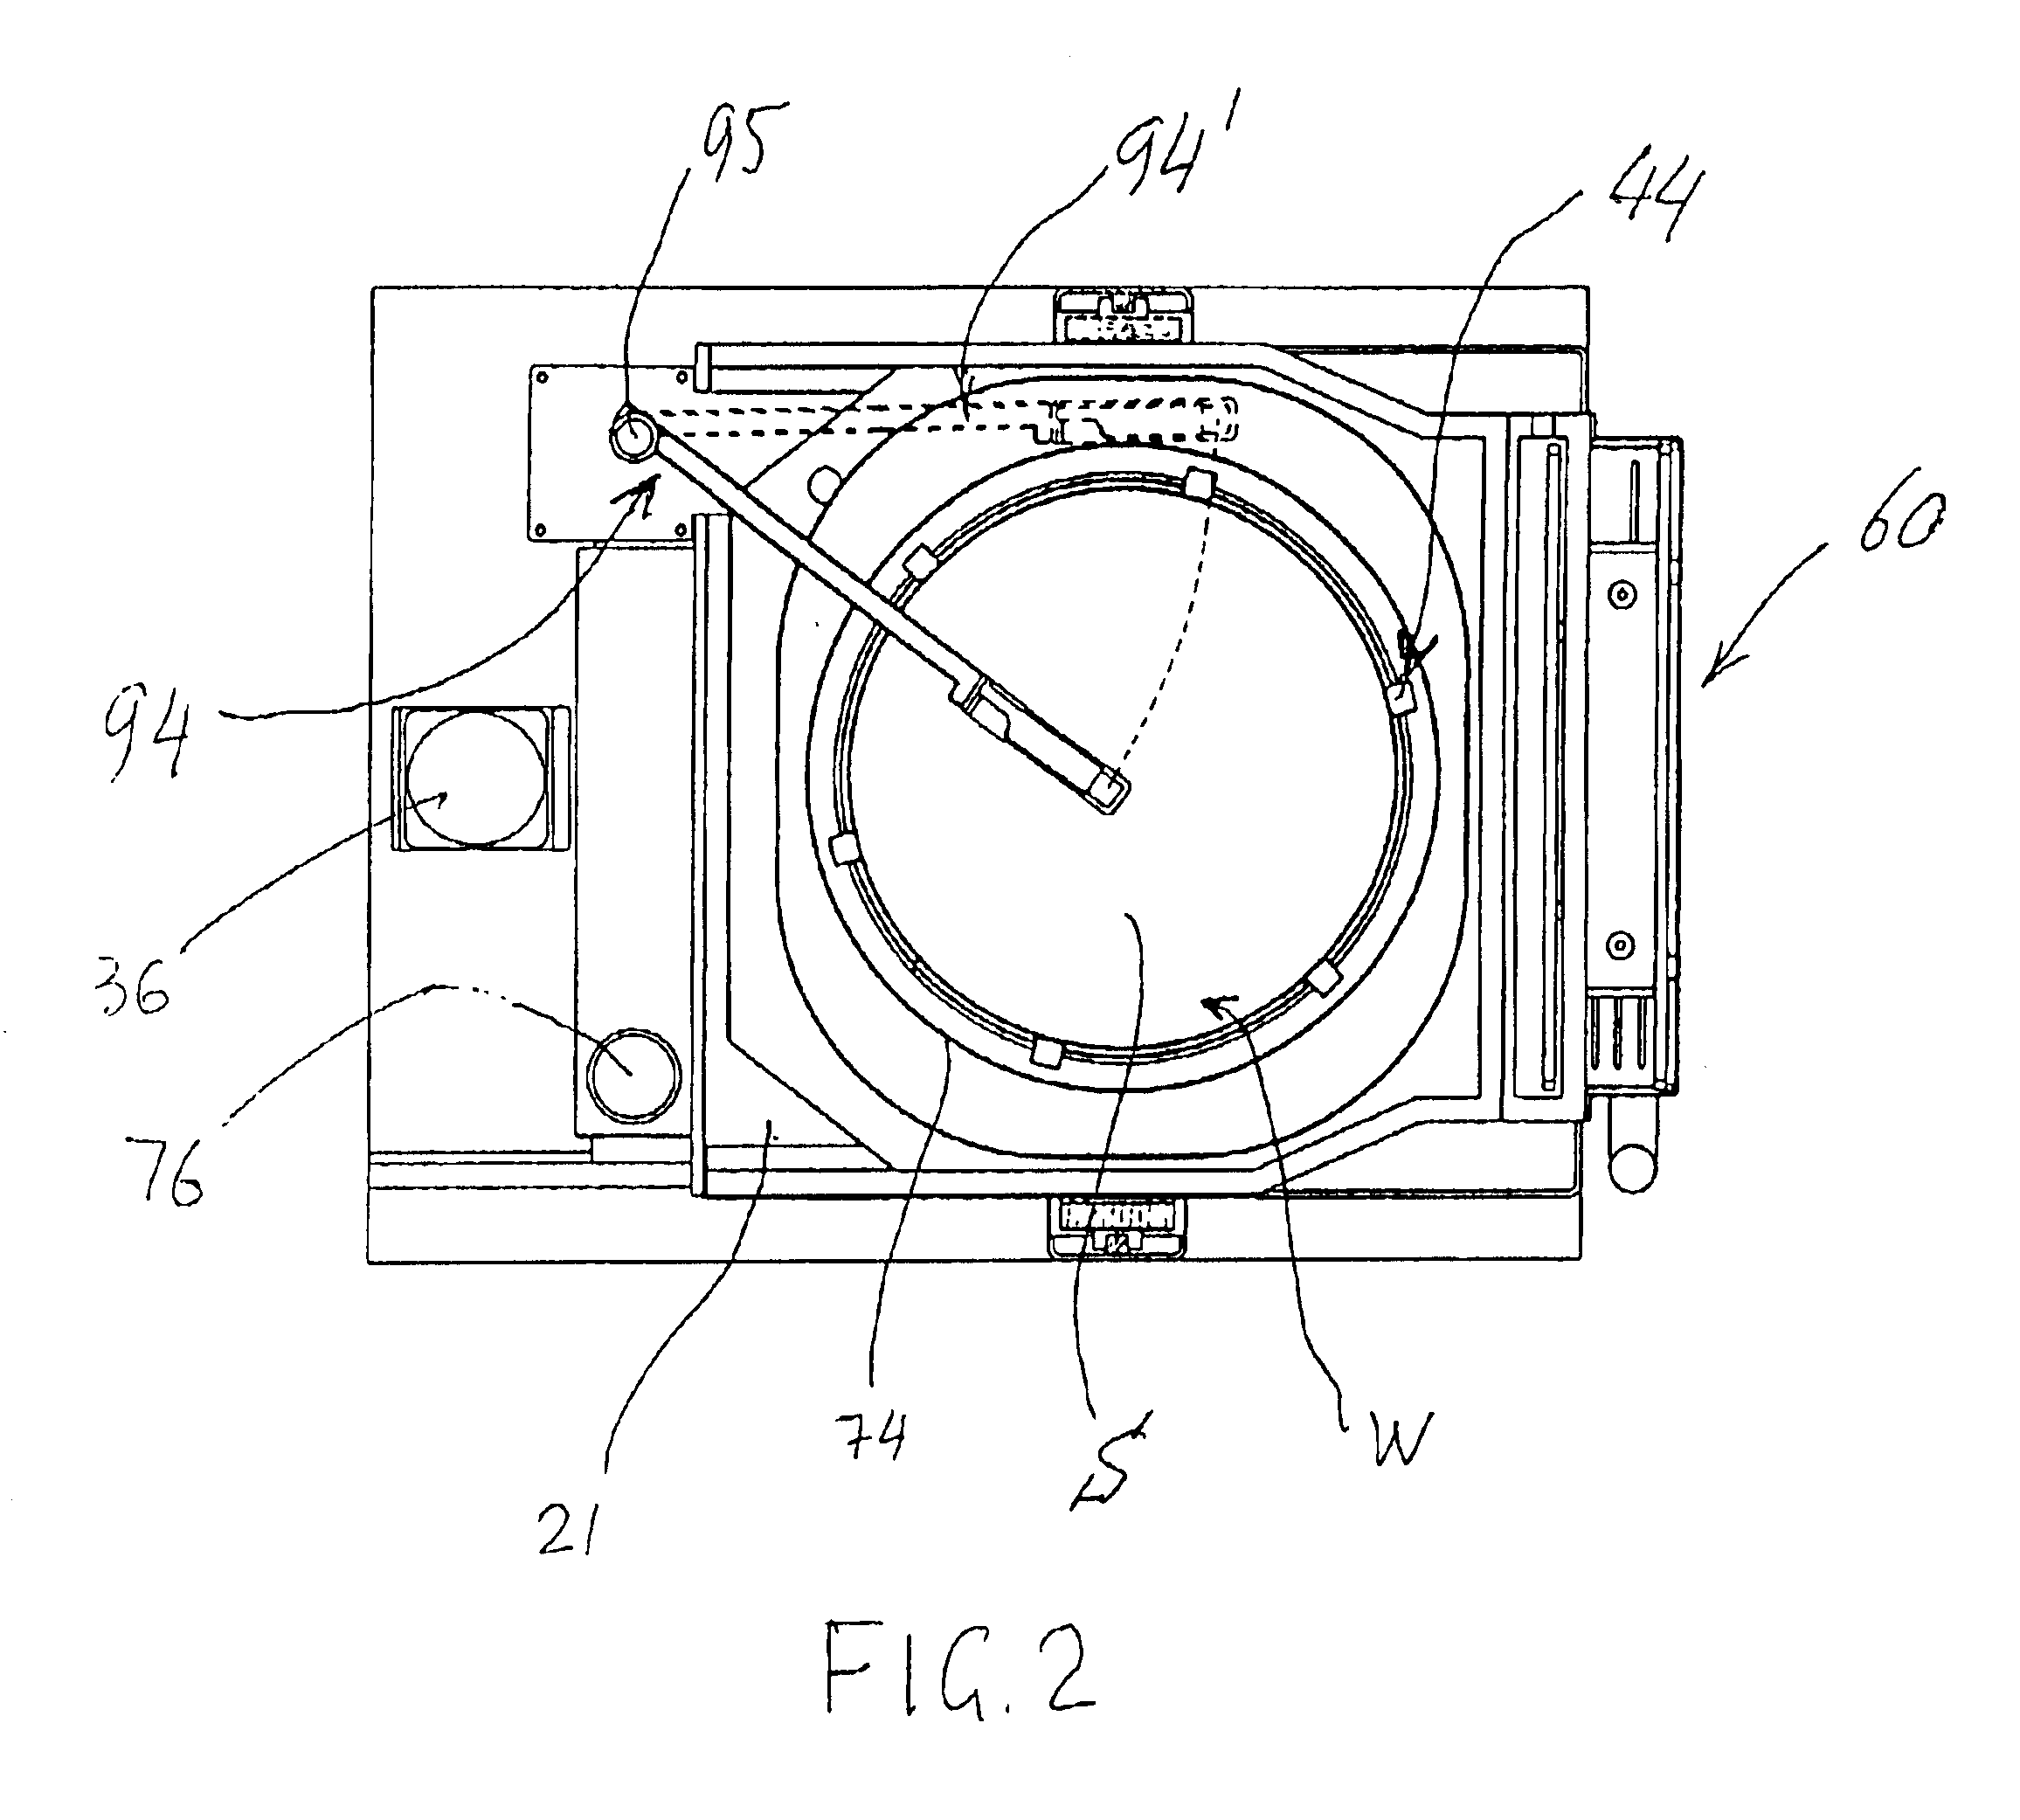 Method and apparatus for electroless deposition with temperature-controlled chuck